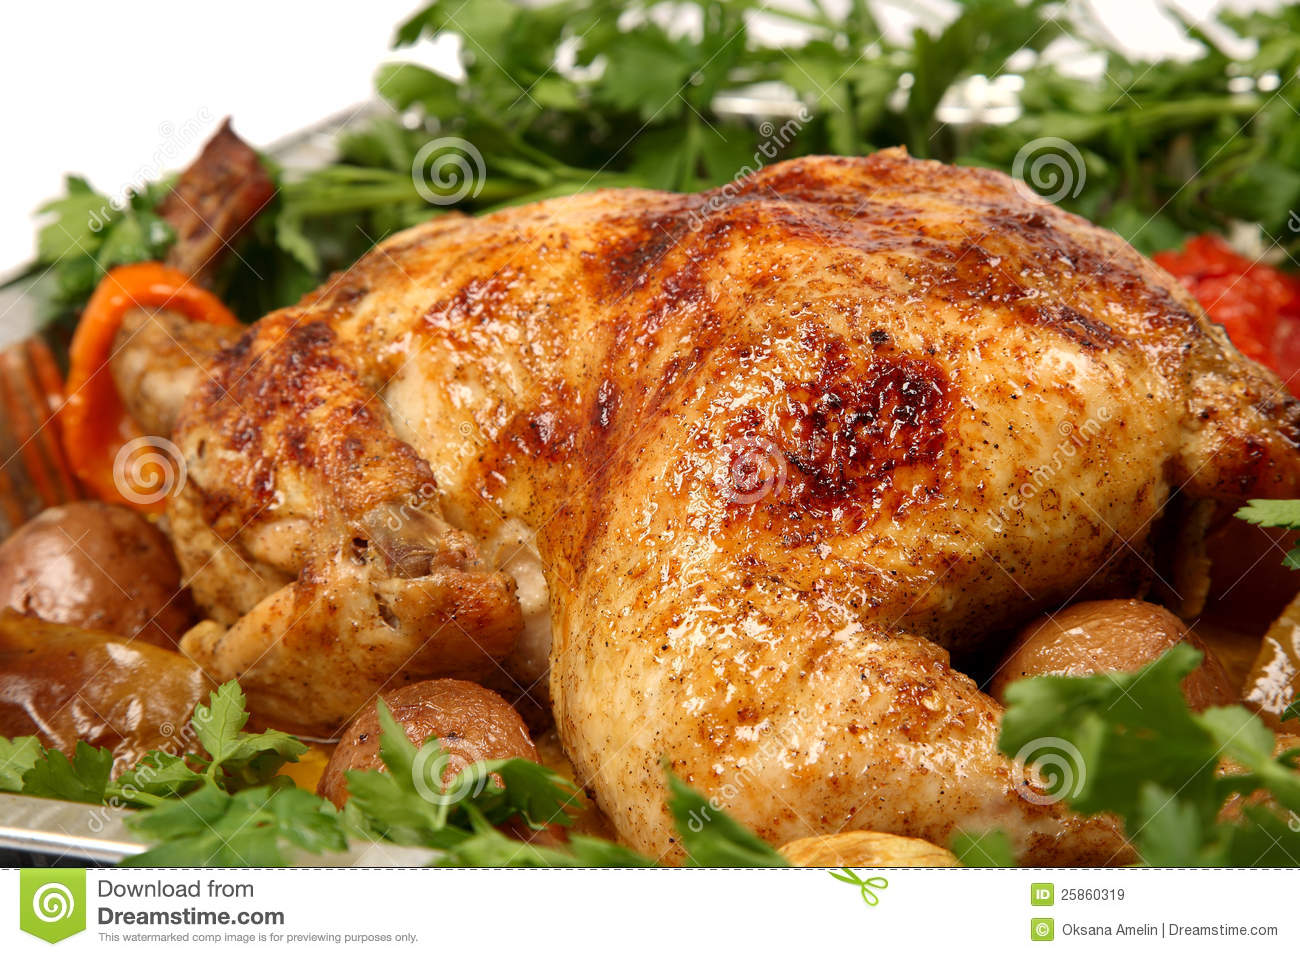 Cooked Chicken With Vegetables Royalty Free Stock Images   Image